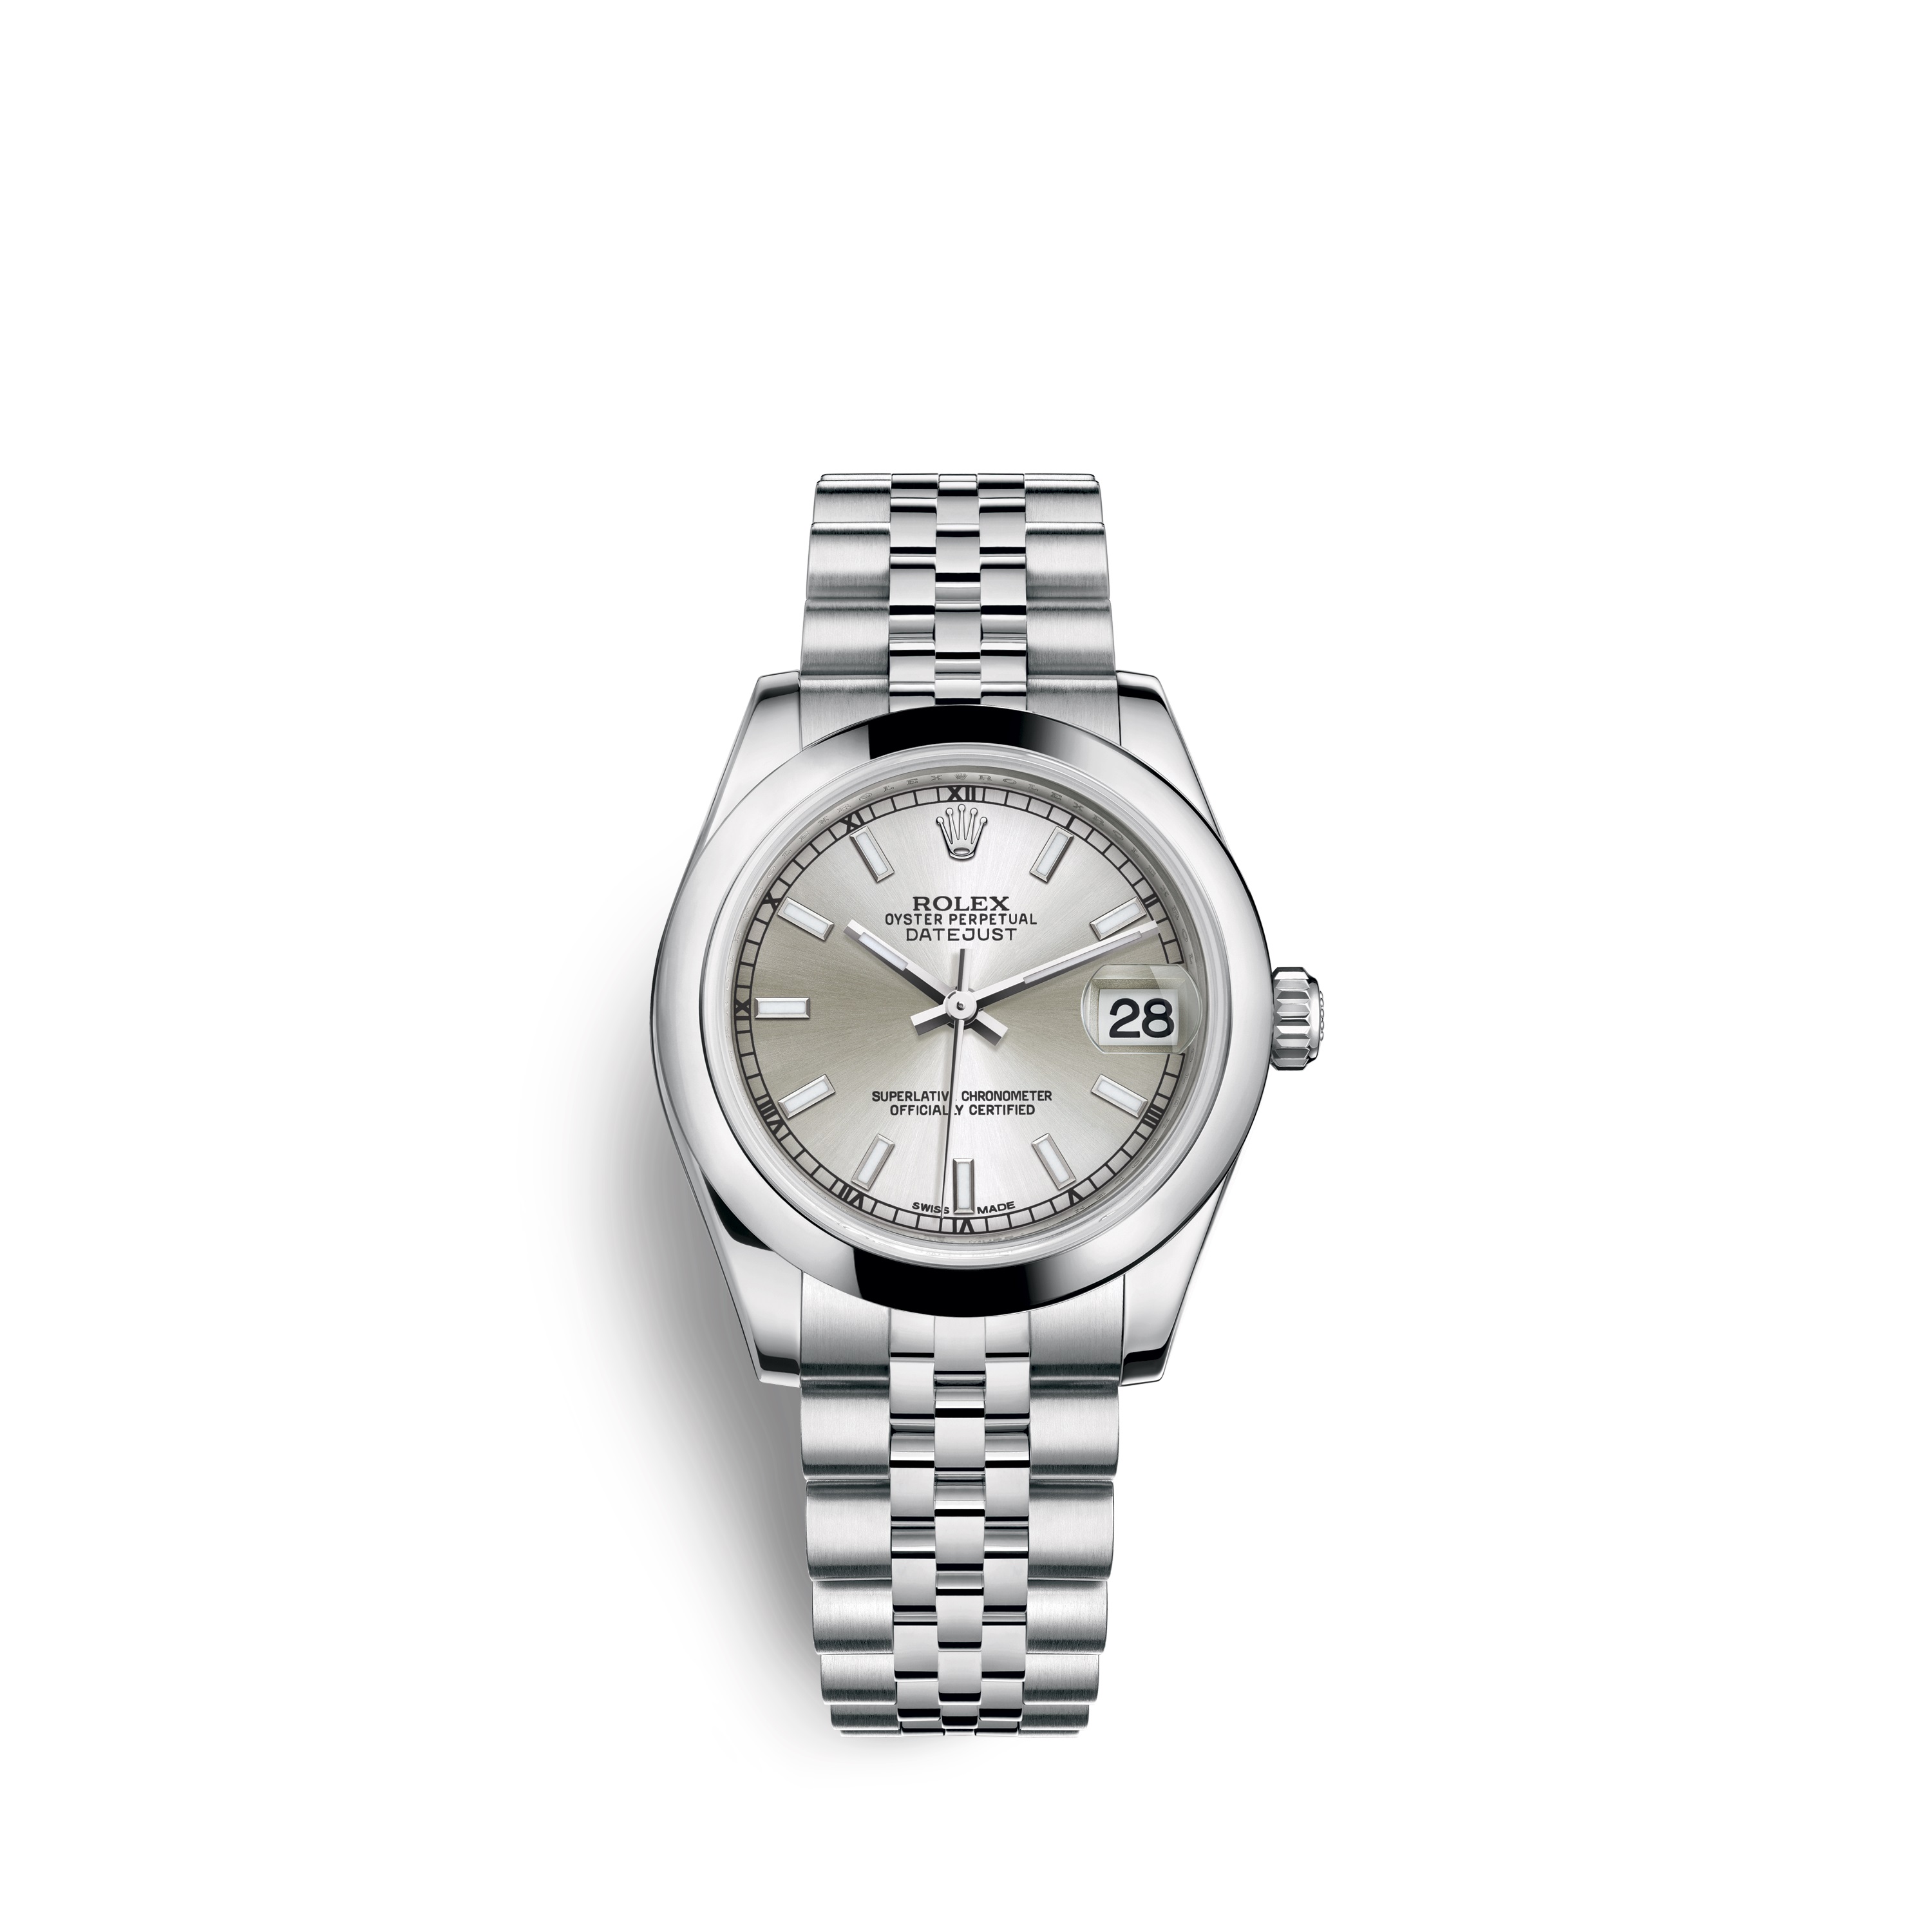 Datejust 31 178240 Stainless Steel Watch (Silver)